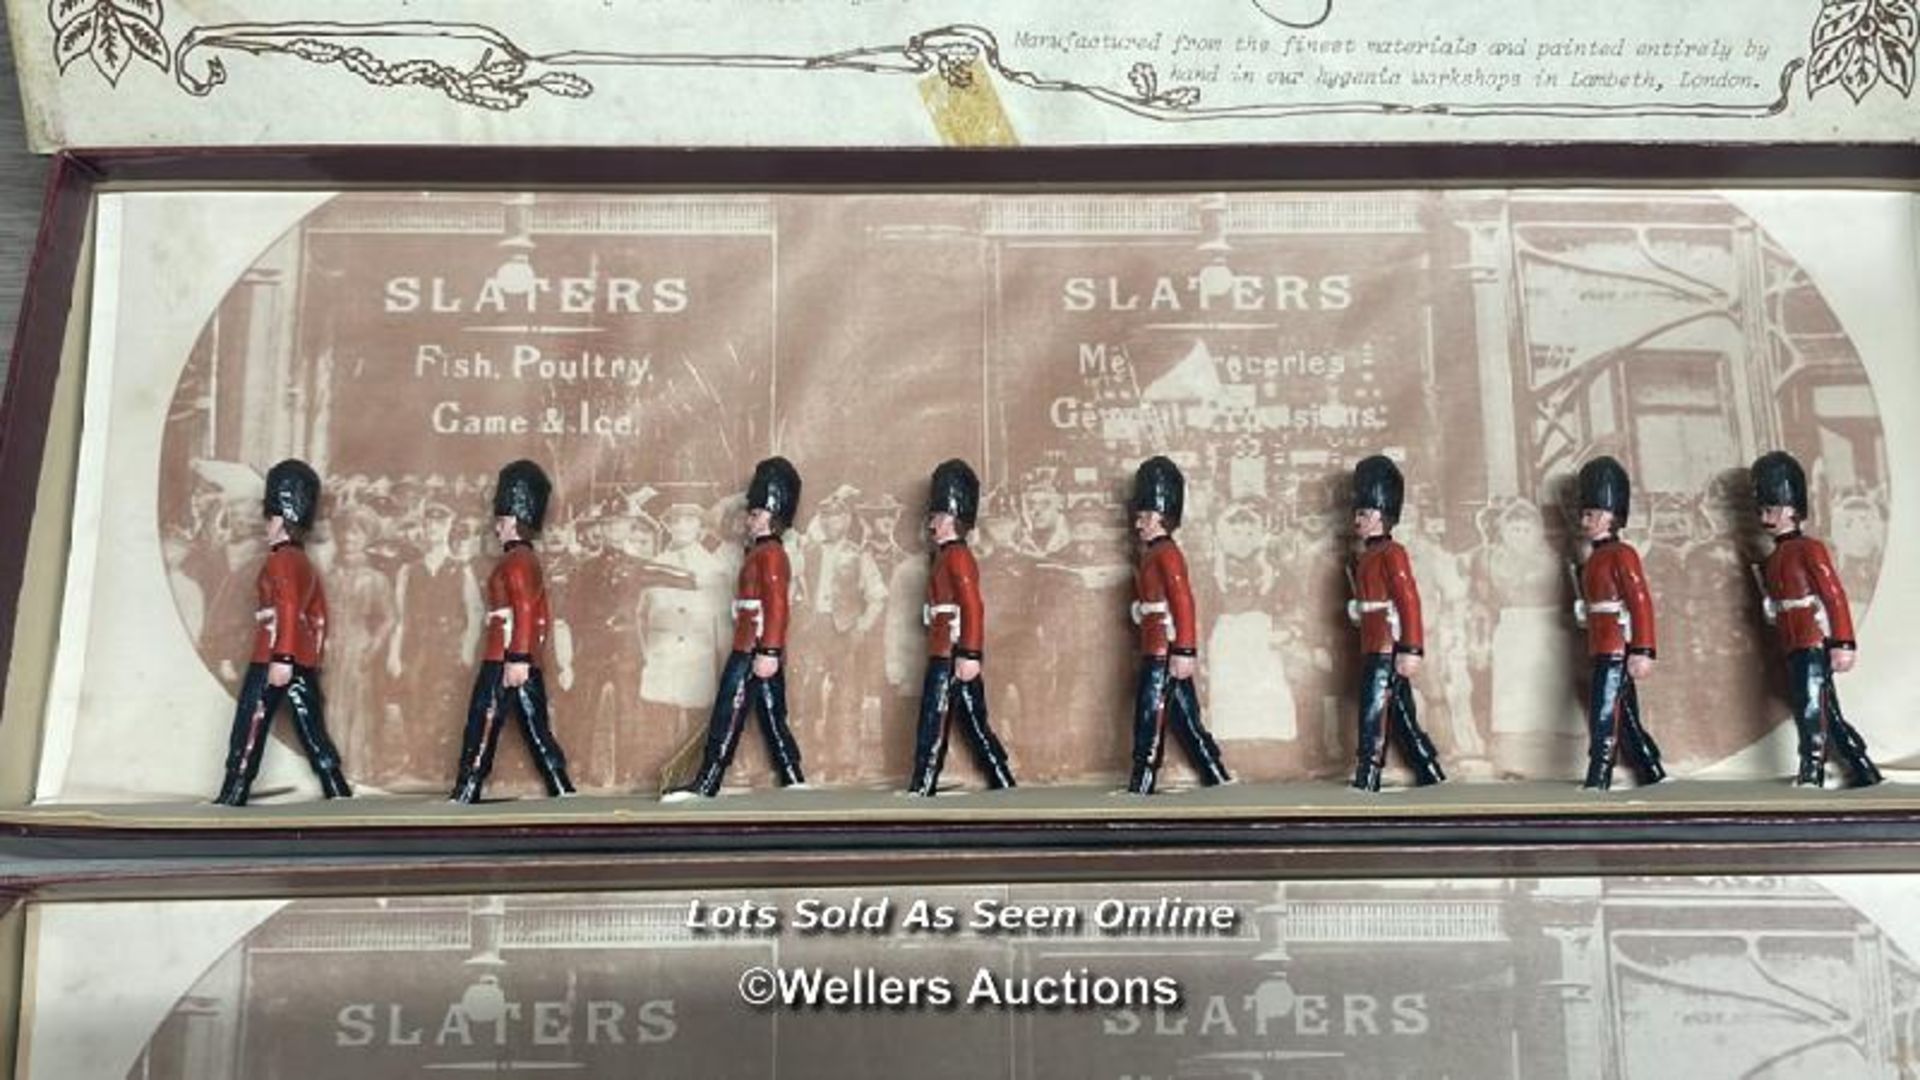 TWO BOXED SETS OF MODEL SOLDIERS DESIGNED BY ANDREW ROSE & JOHN TUNSTILL, FUSILIER REGTS. 1880 - - Image 3 of 5